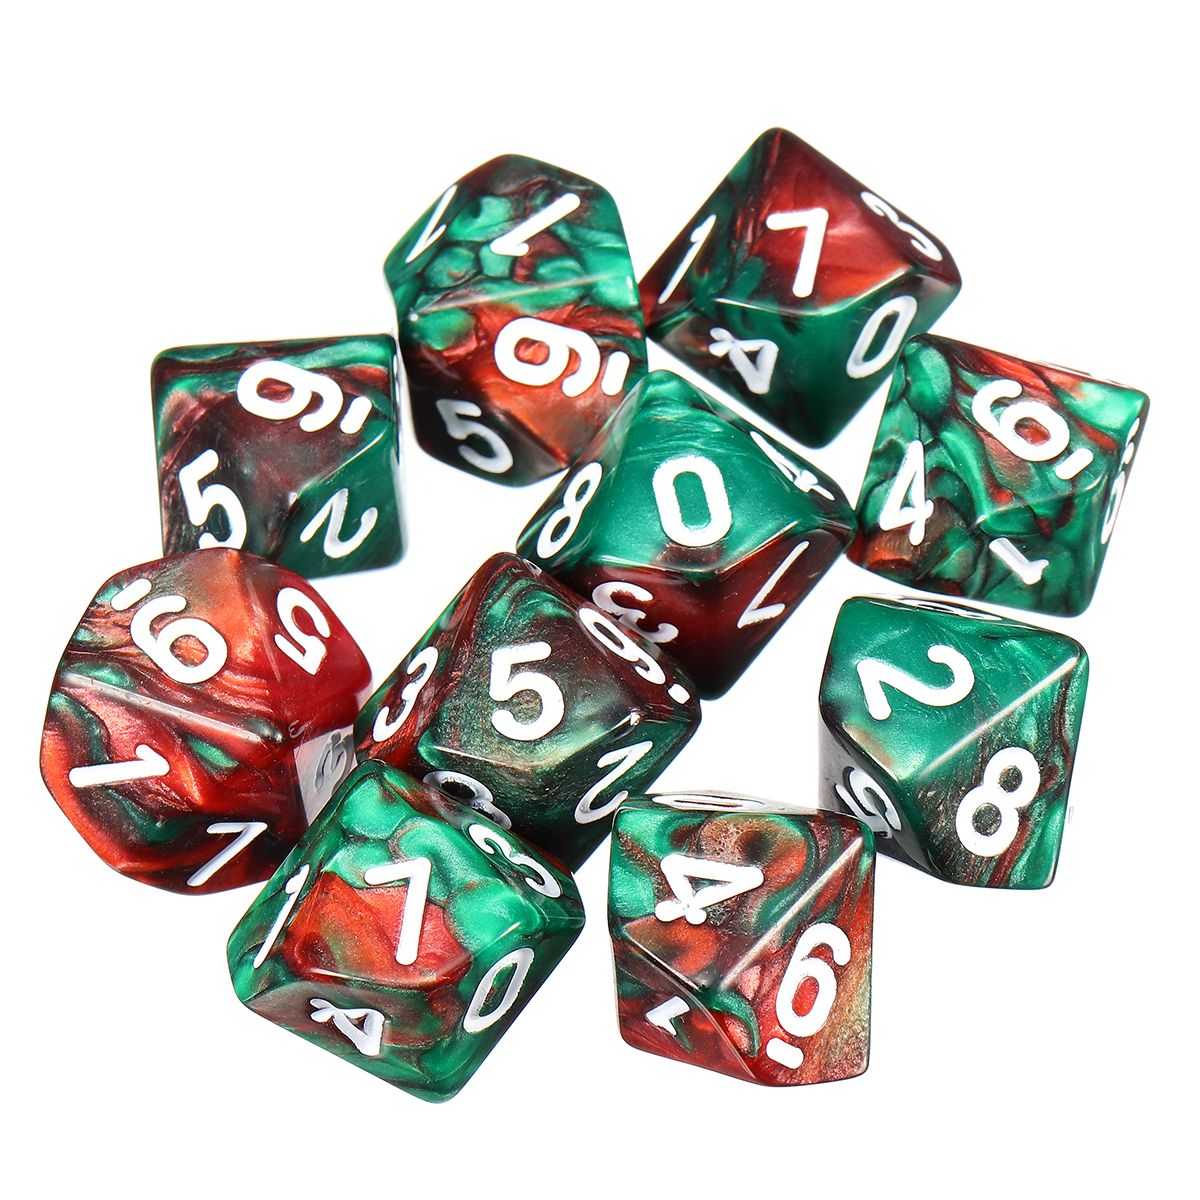 10pcs-10-Sided-Dice-D10-Polyhedral-Dice-RPG-Role-Playing-Game-Dices-w-bag-1351752